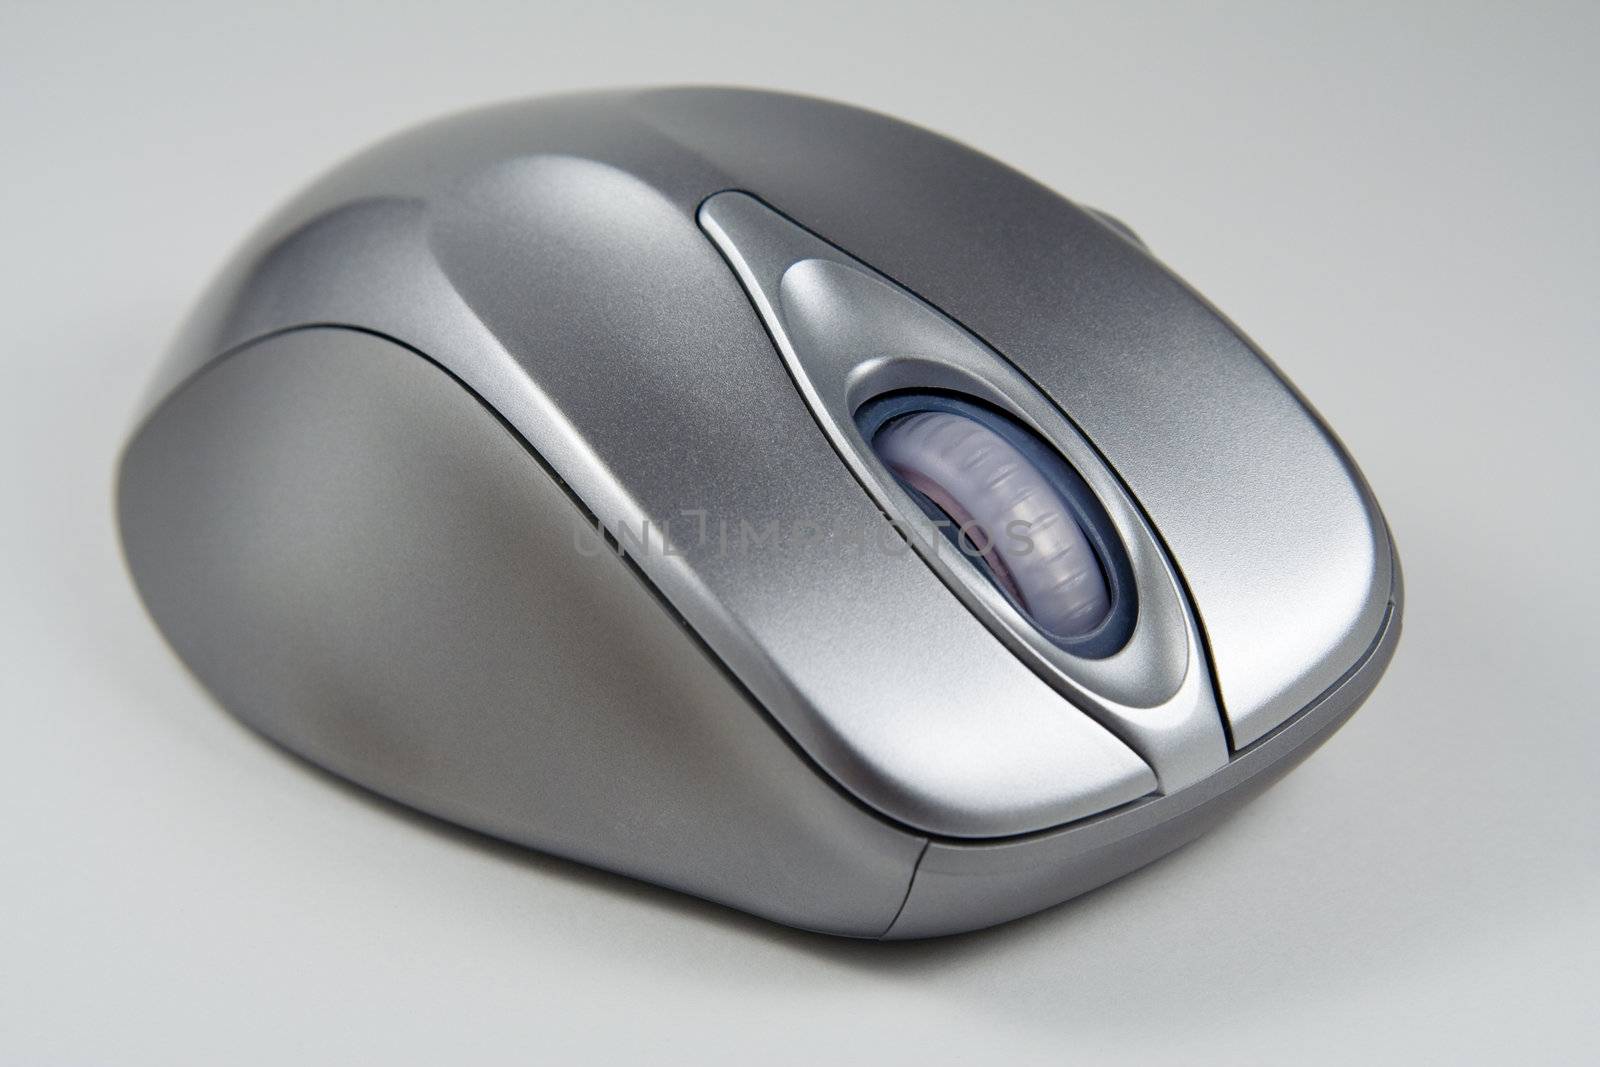 Image of cordless optical mouse on gray background by serpl